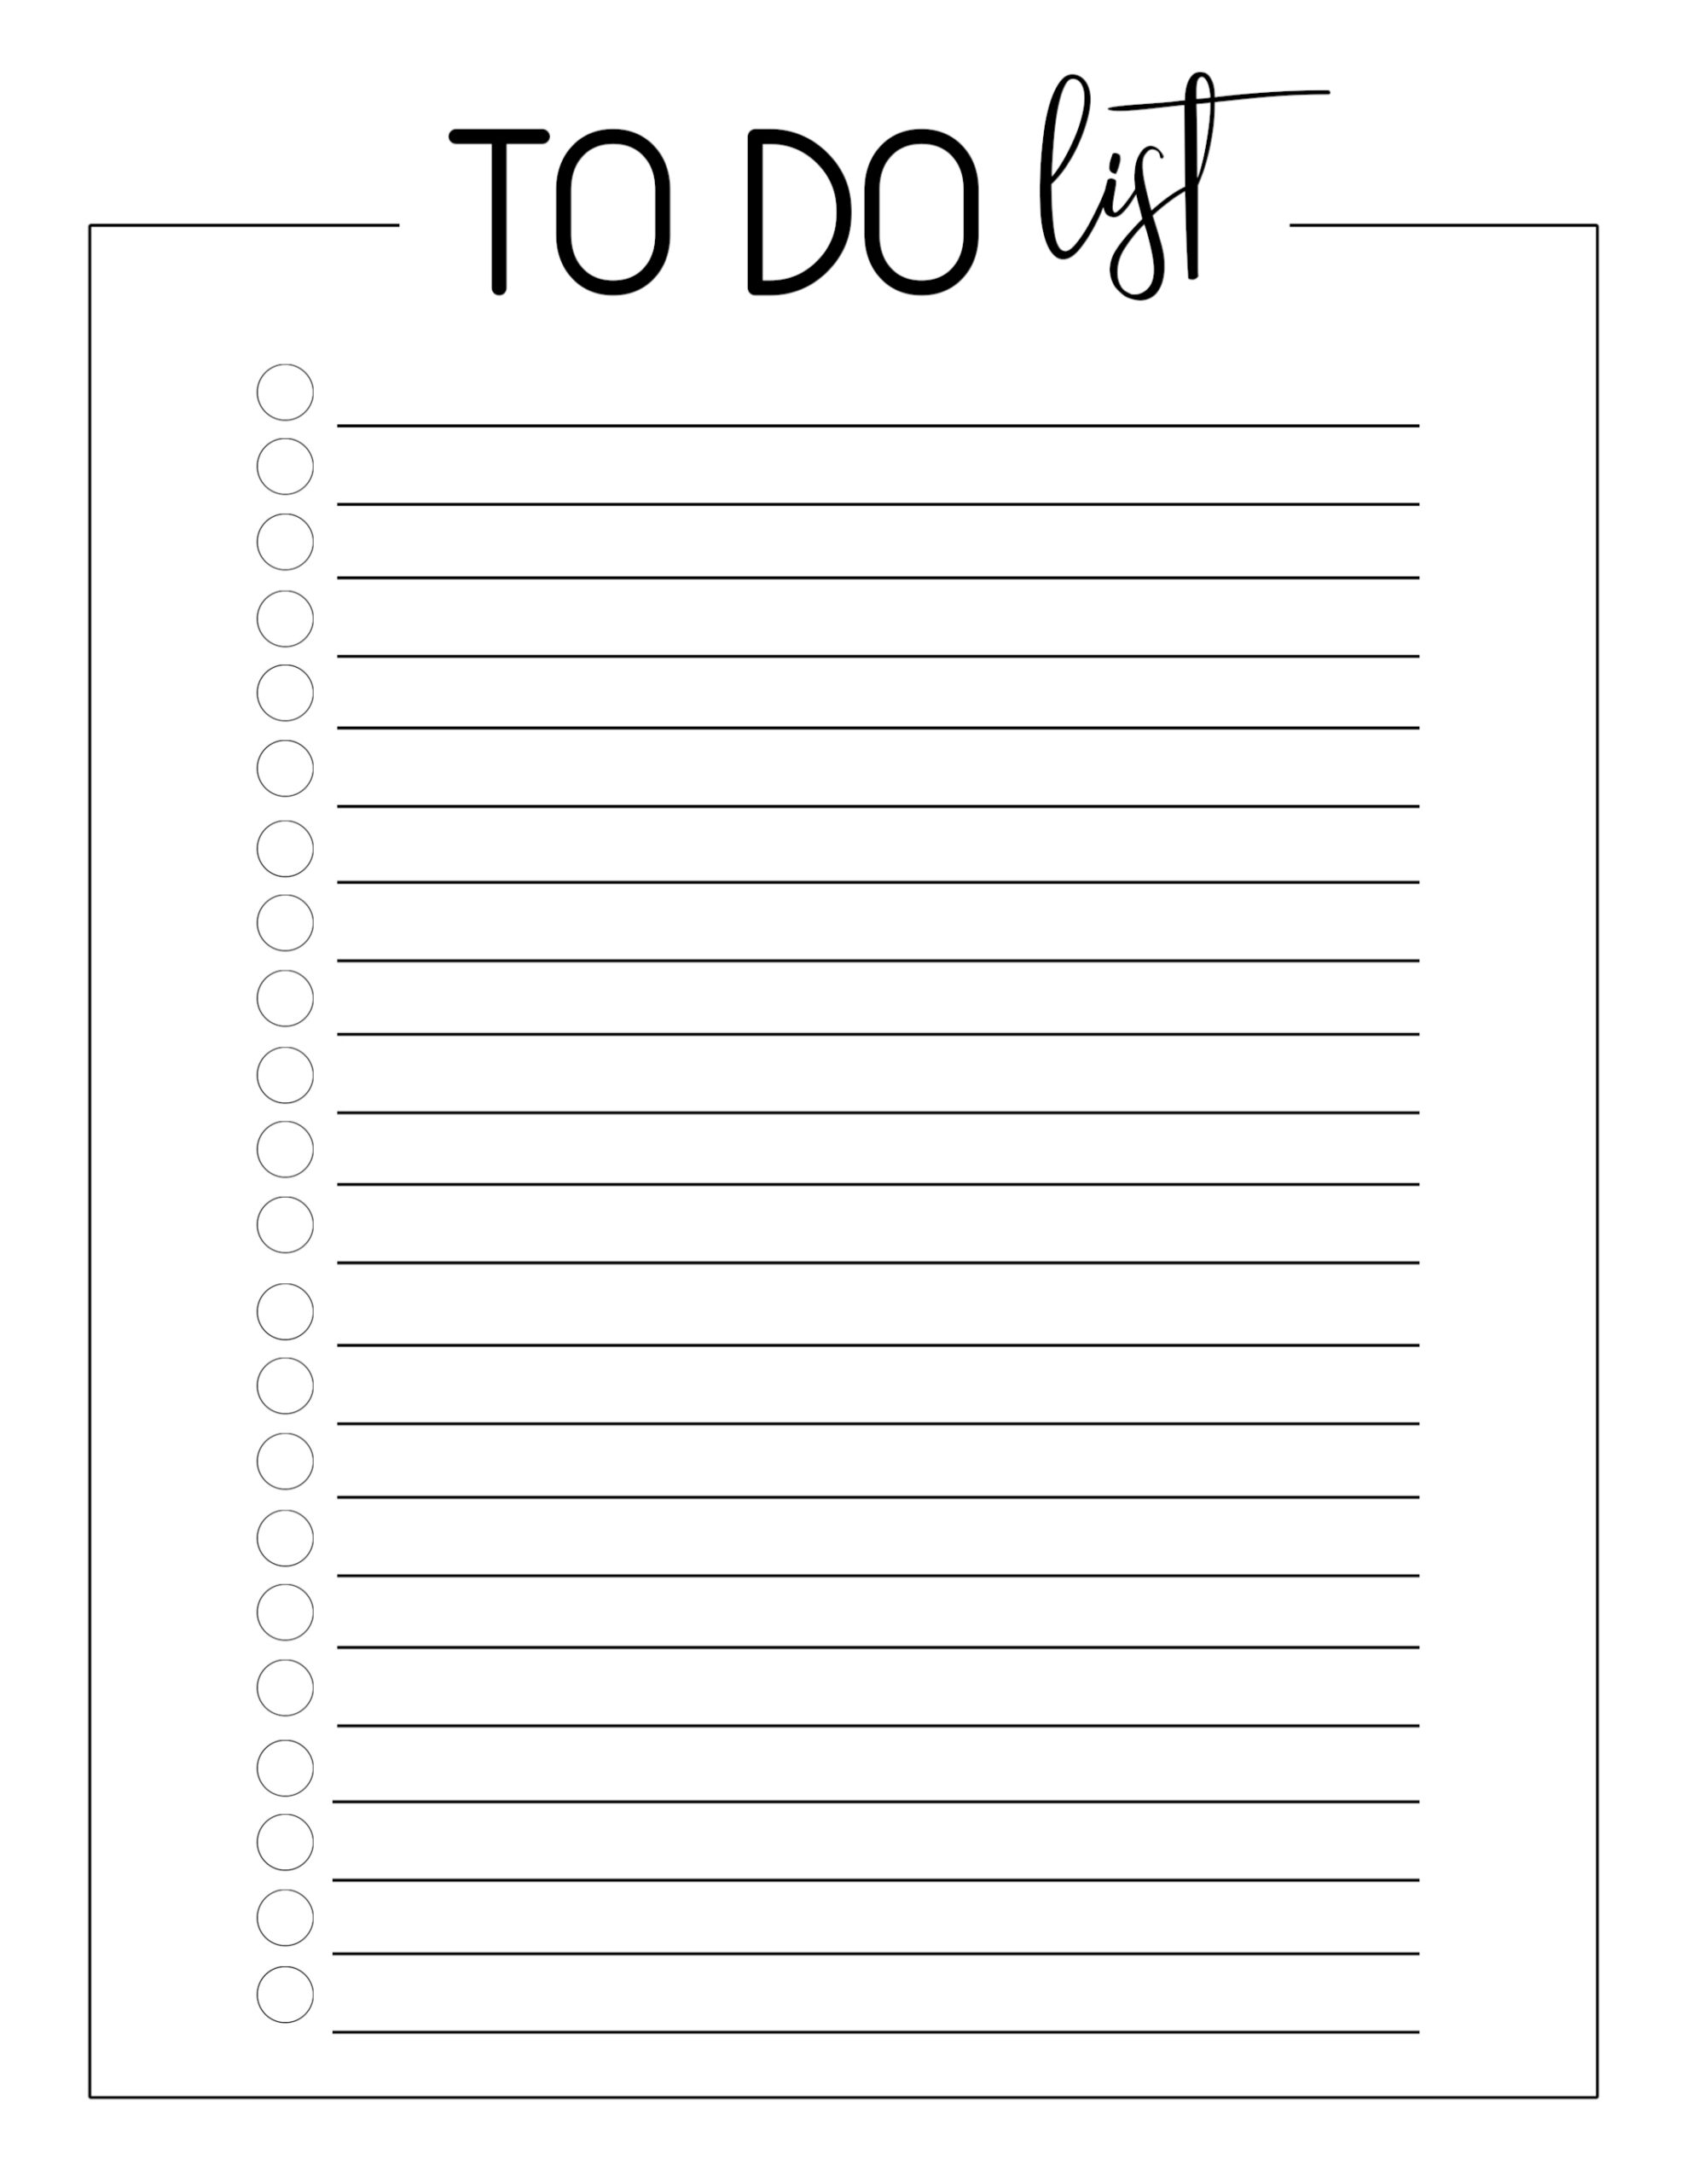 To Do List Format Free